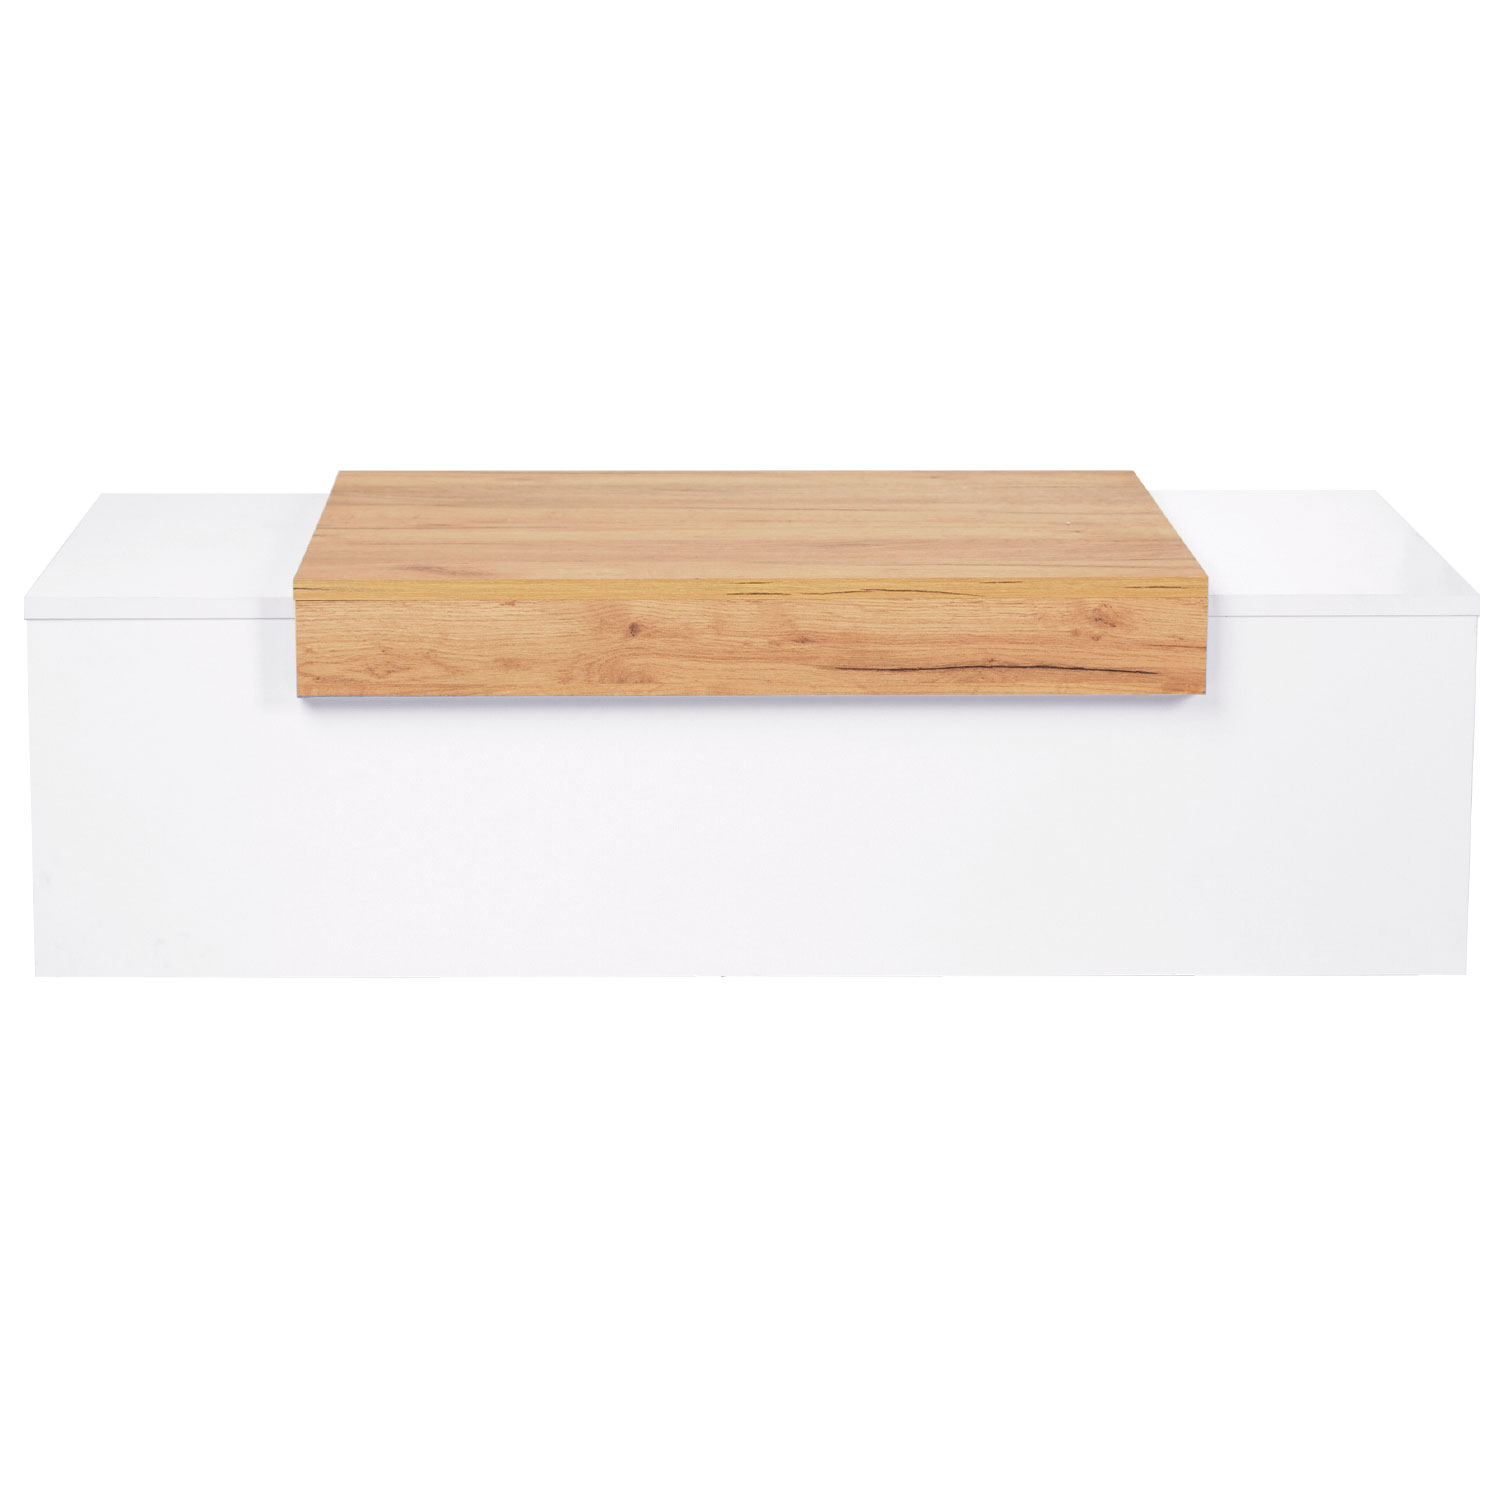 Living Room Table Coffee Table Wood White Oak Sofa Table Natural Wooden Table Side Table Modern